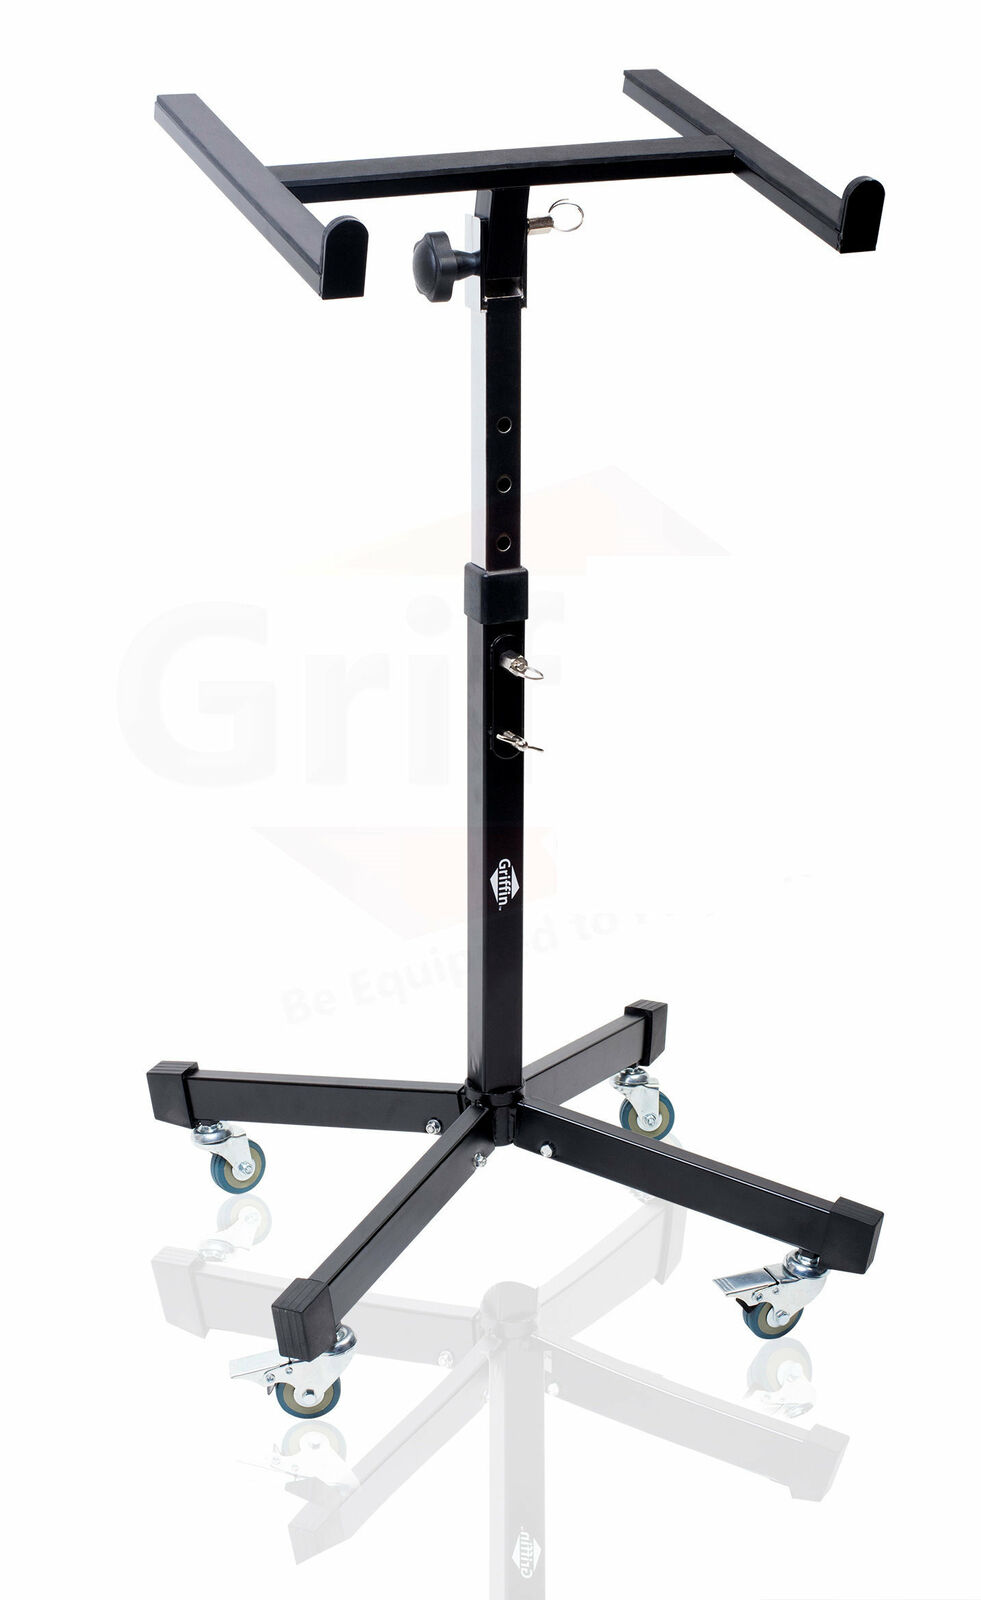 GRIFFIN Studio Music Mixer Stand on Wheels - DJ Recording Gear Cart Table Mount